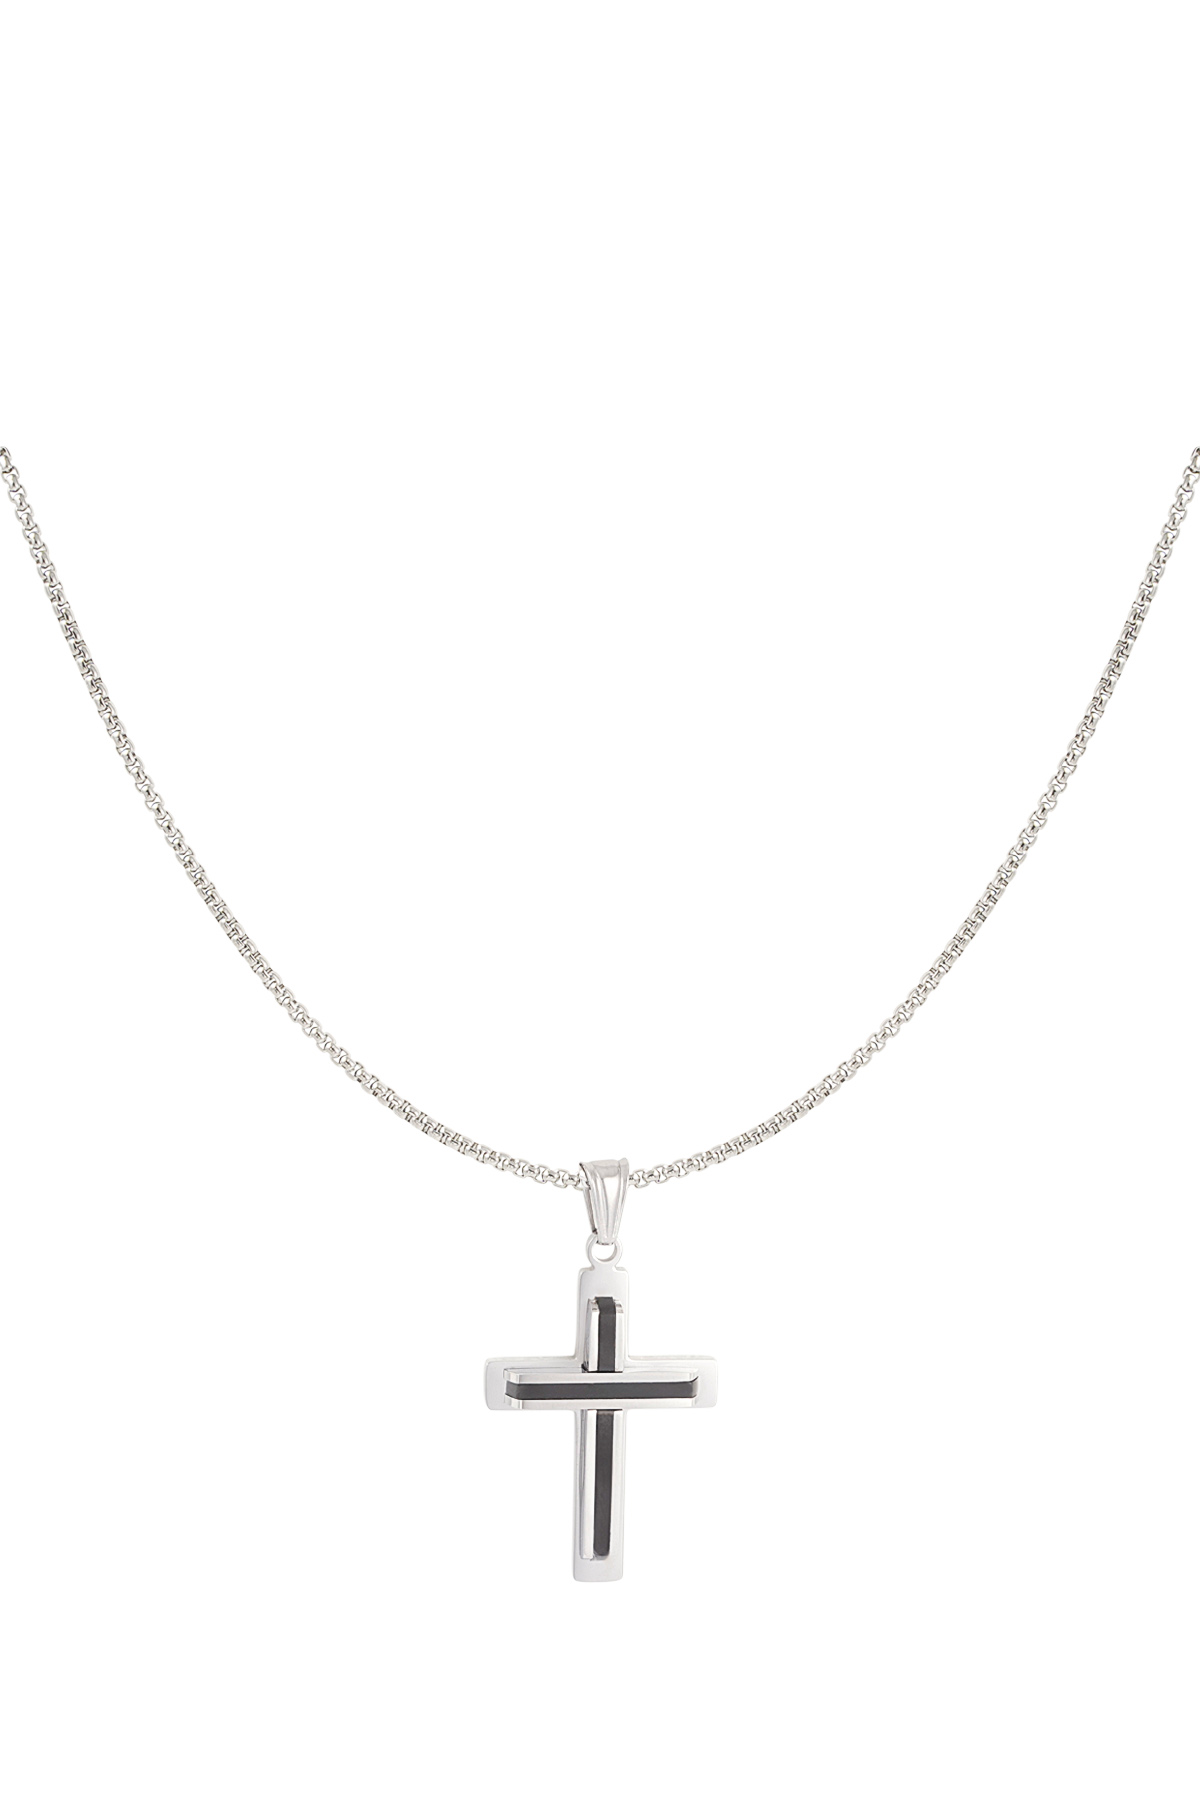 Simple necklace with cross charm - black/silver 